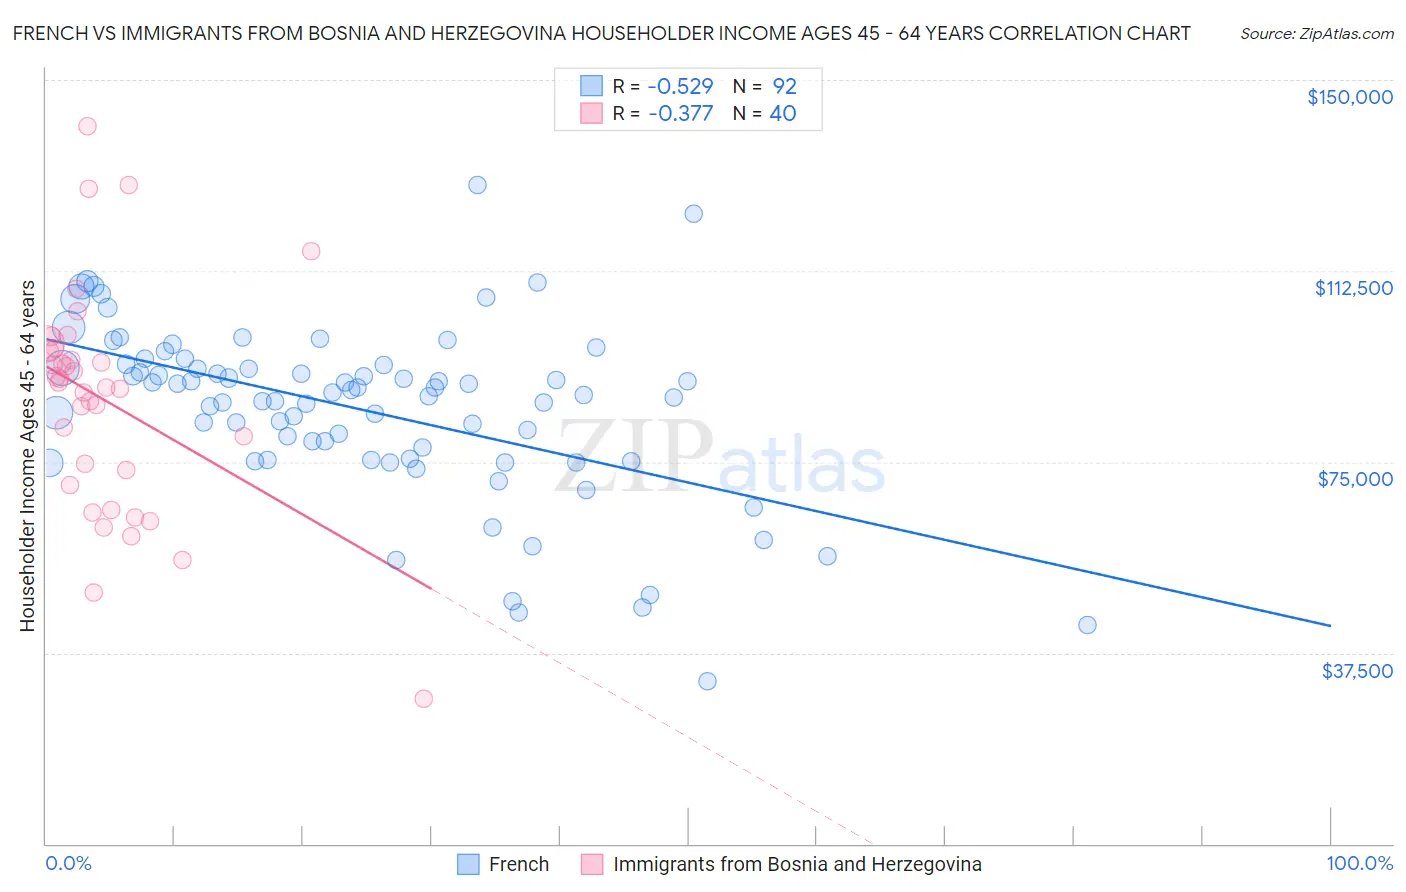 French vs Immigrants from Bosnia and Herzegovina Householder Income Ages 45 - 64 years